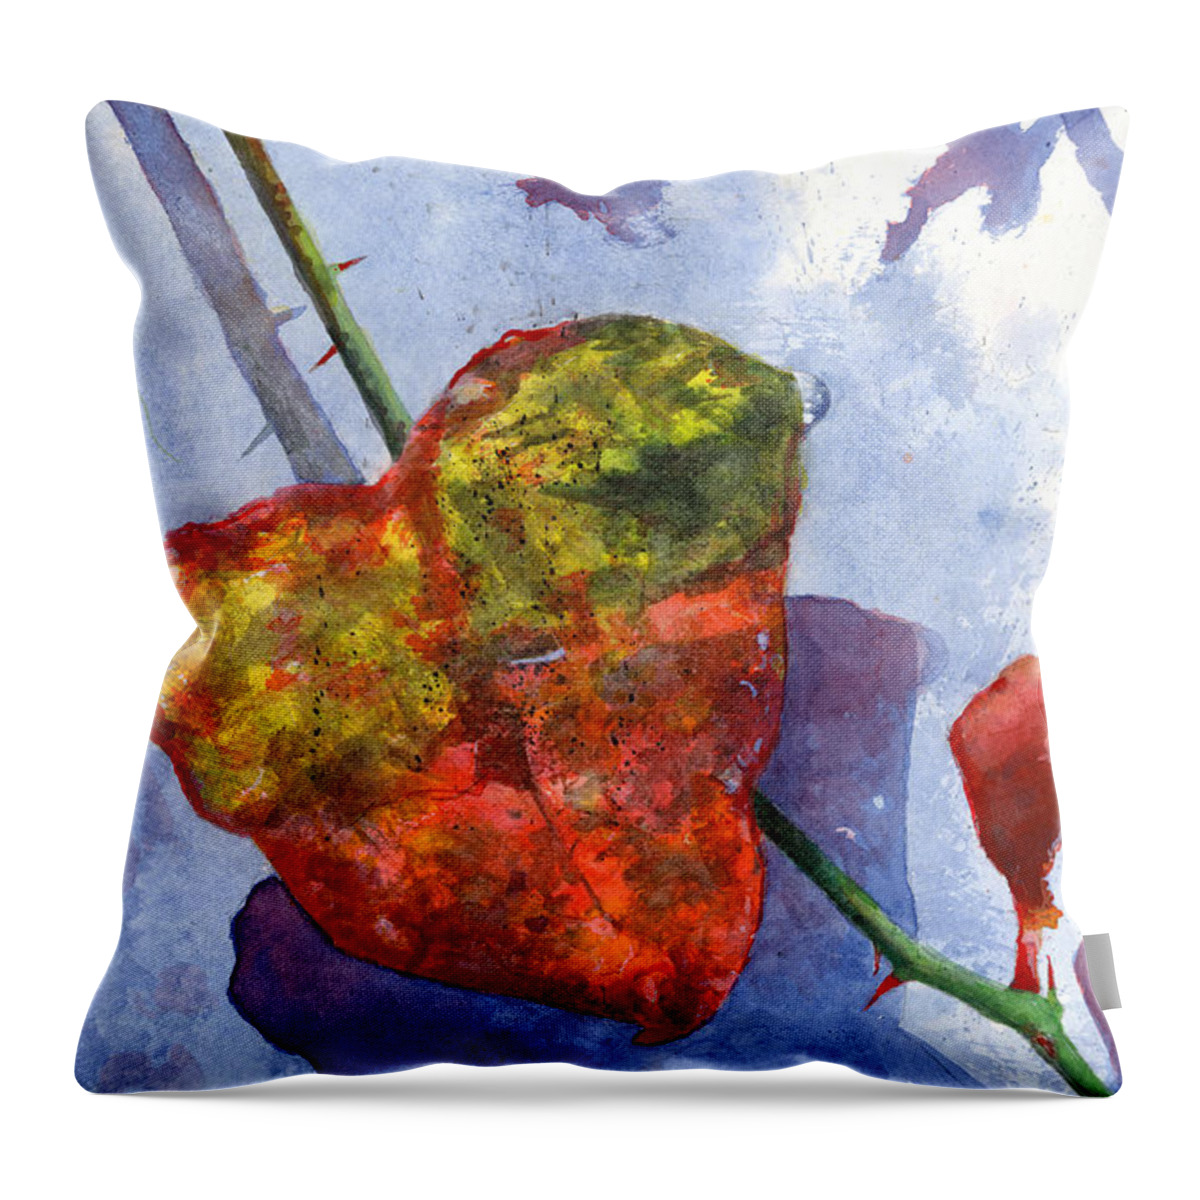 Winter Throw Pillow featuring the painting Snow Leaf by Andrew King